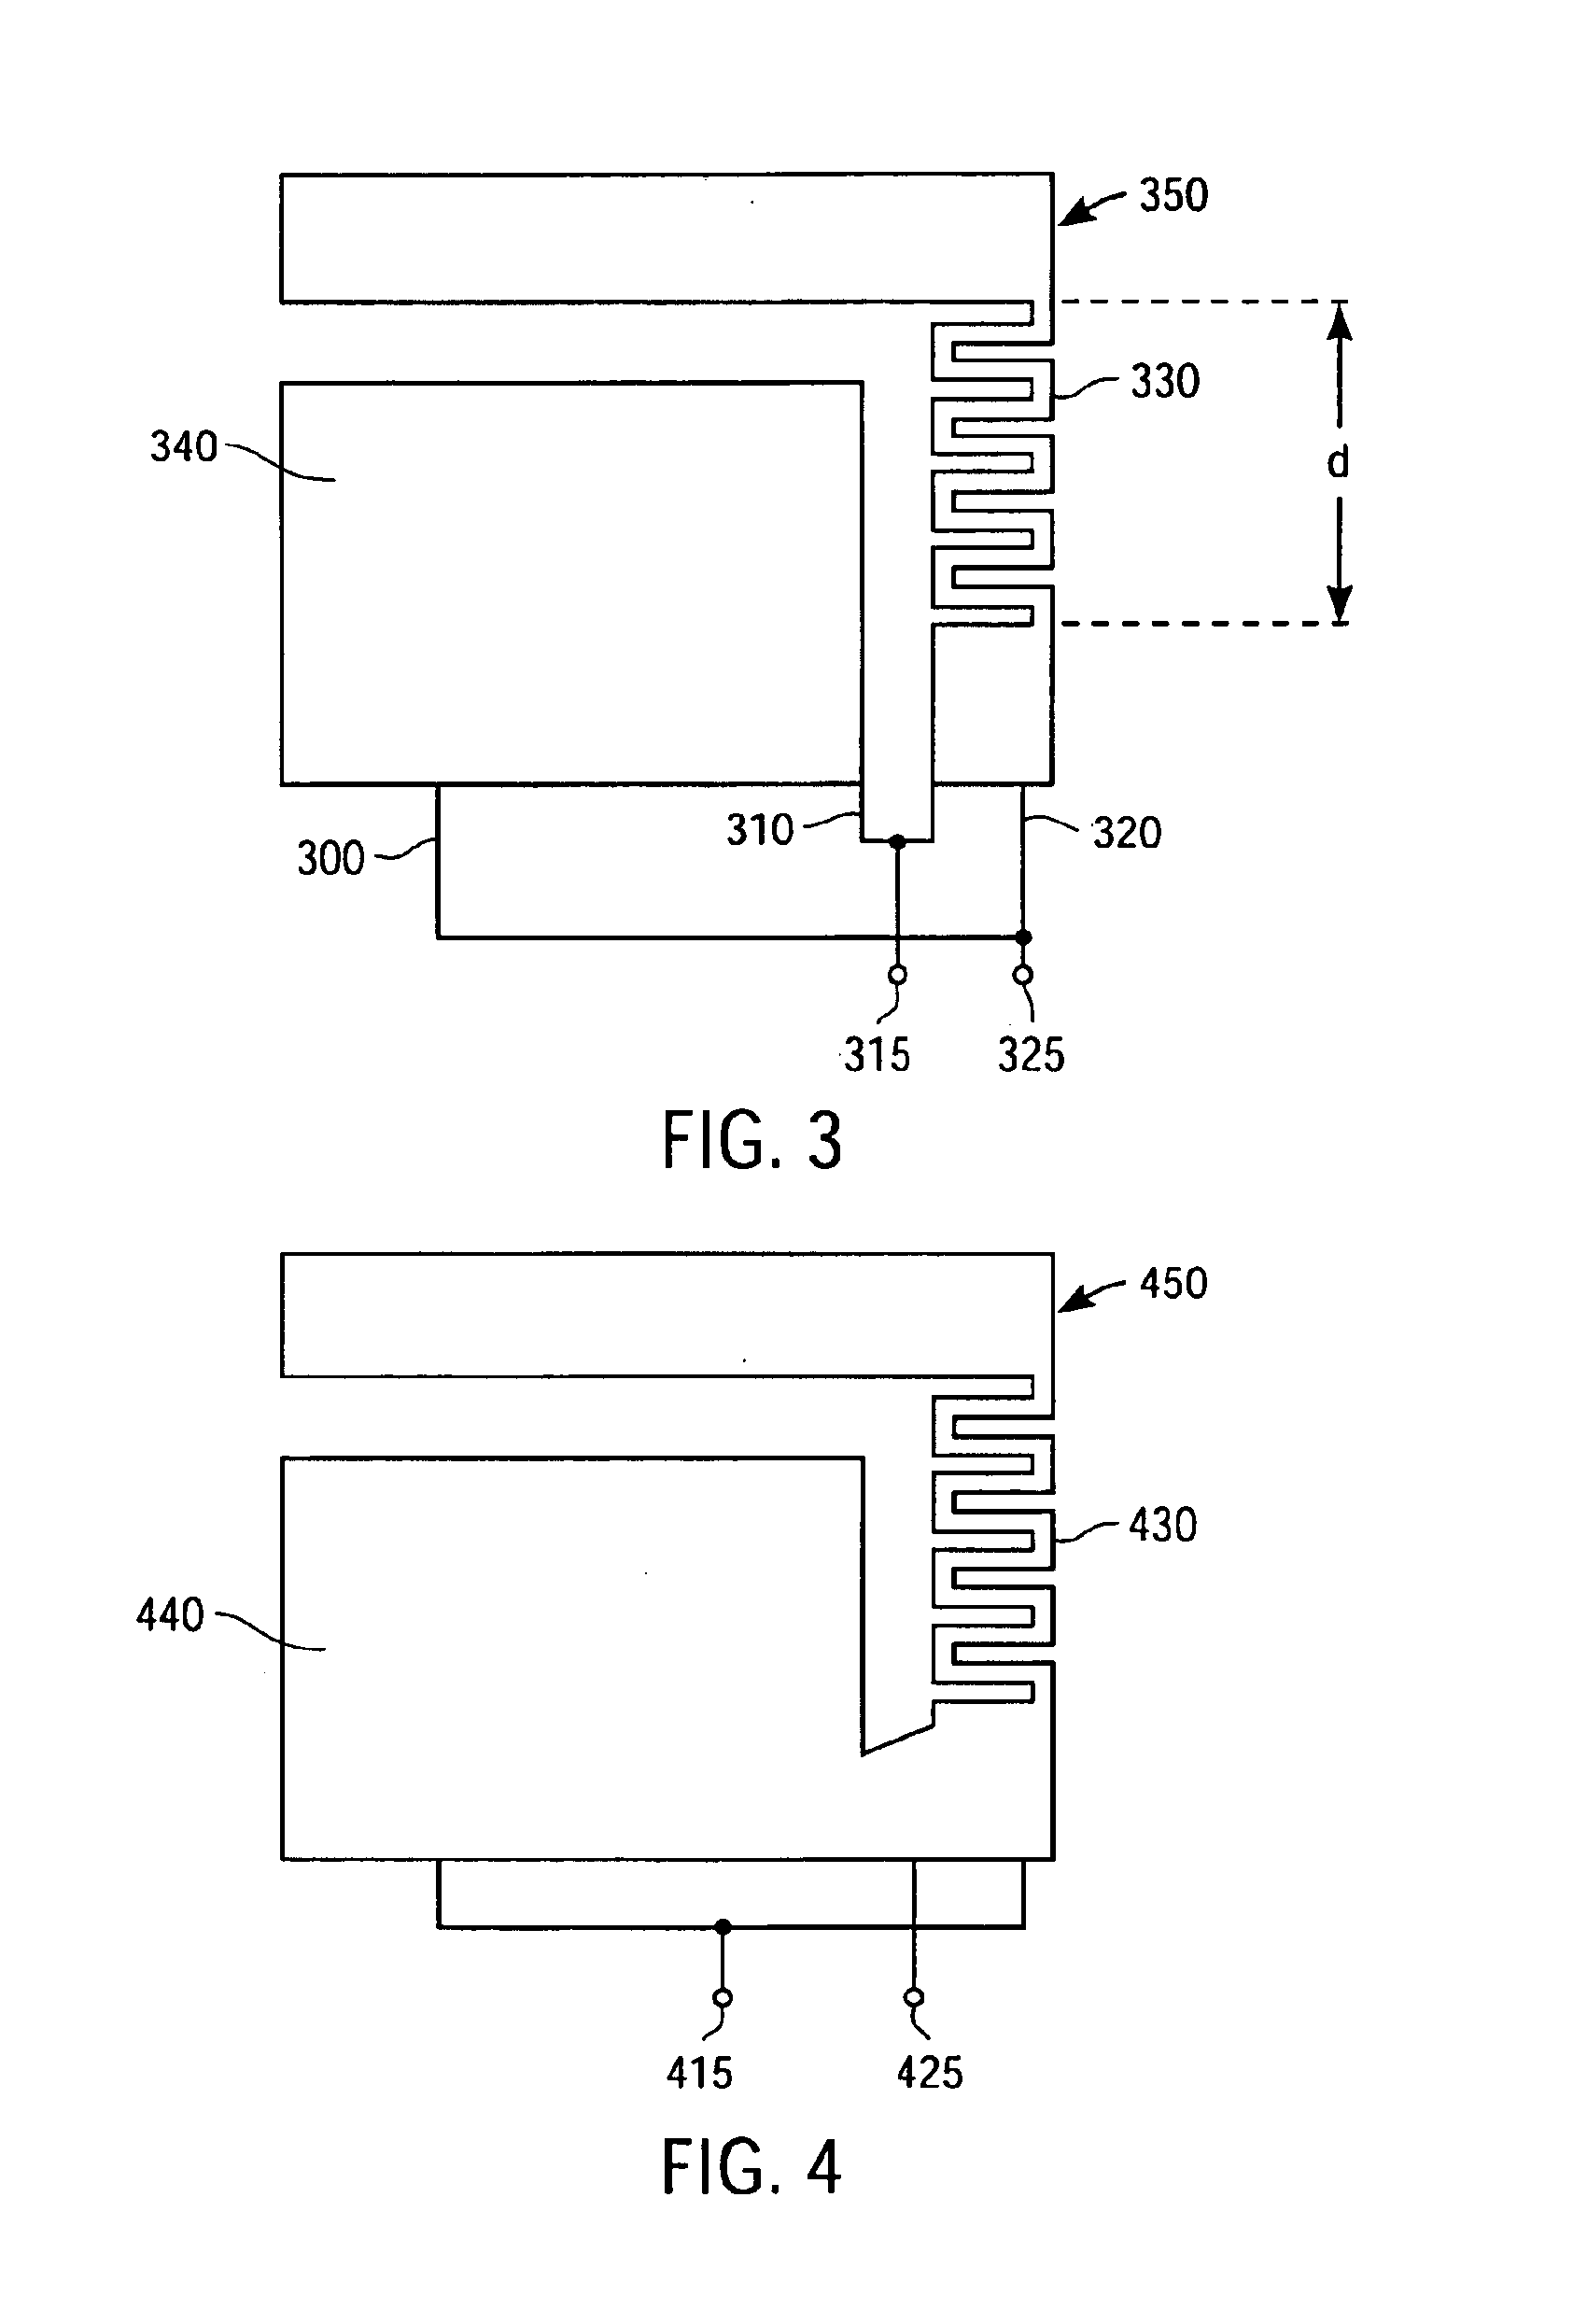 Multi-band PIF antenna with meander structure